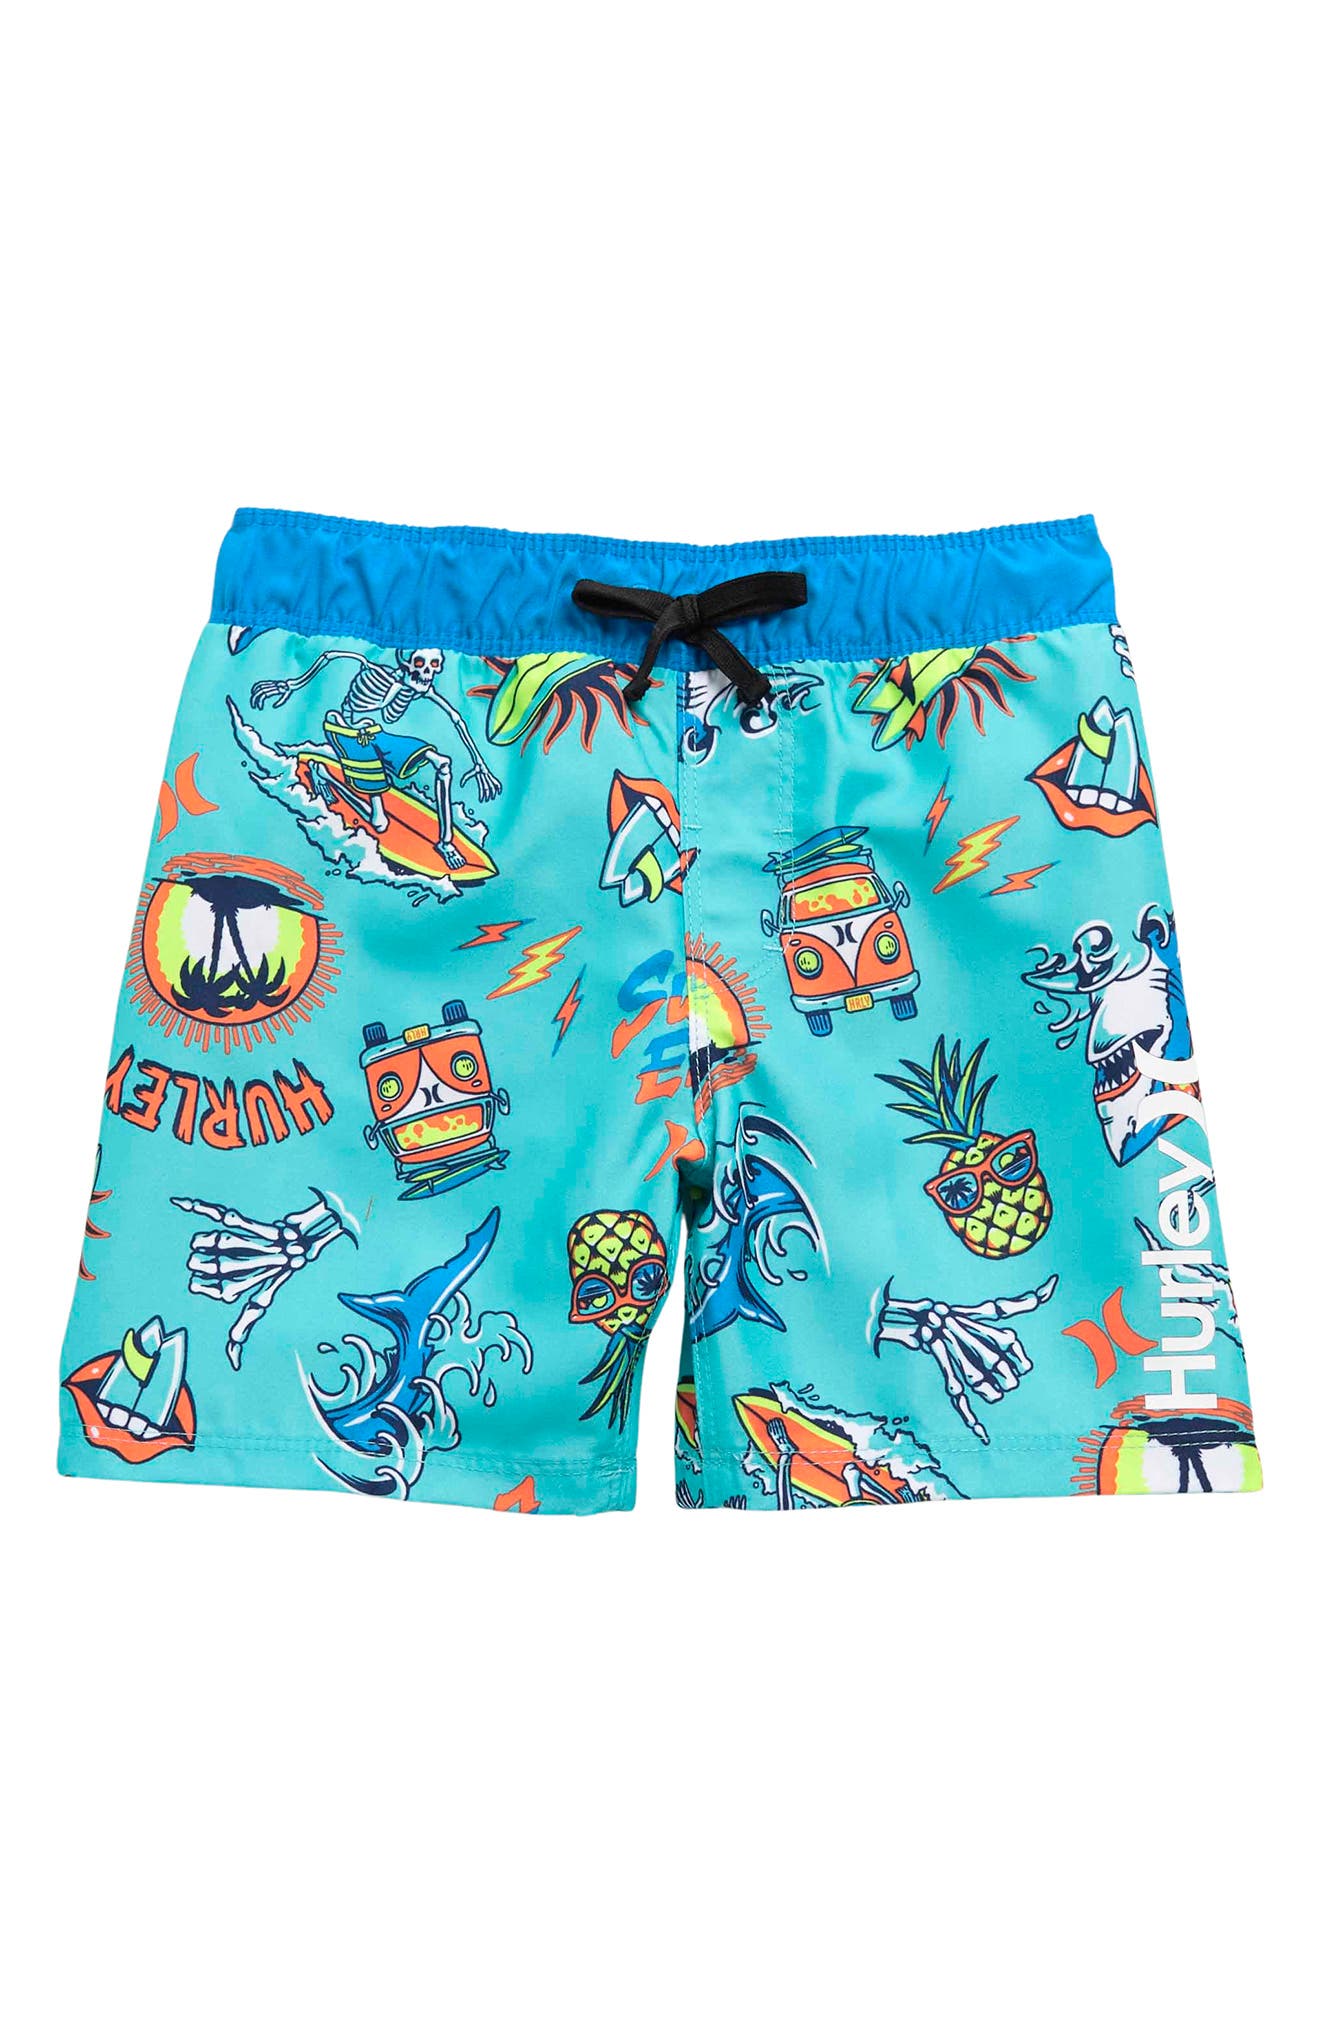 Little Me Childrens Apparel Baby and Toddler Boys Swim Trunks